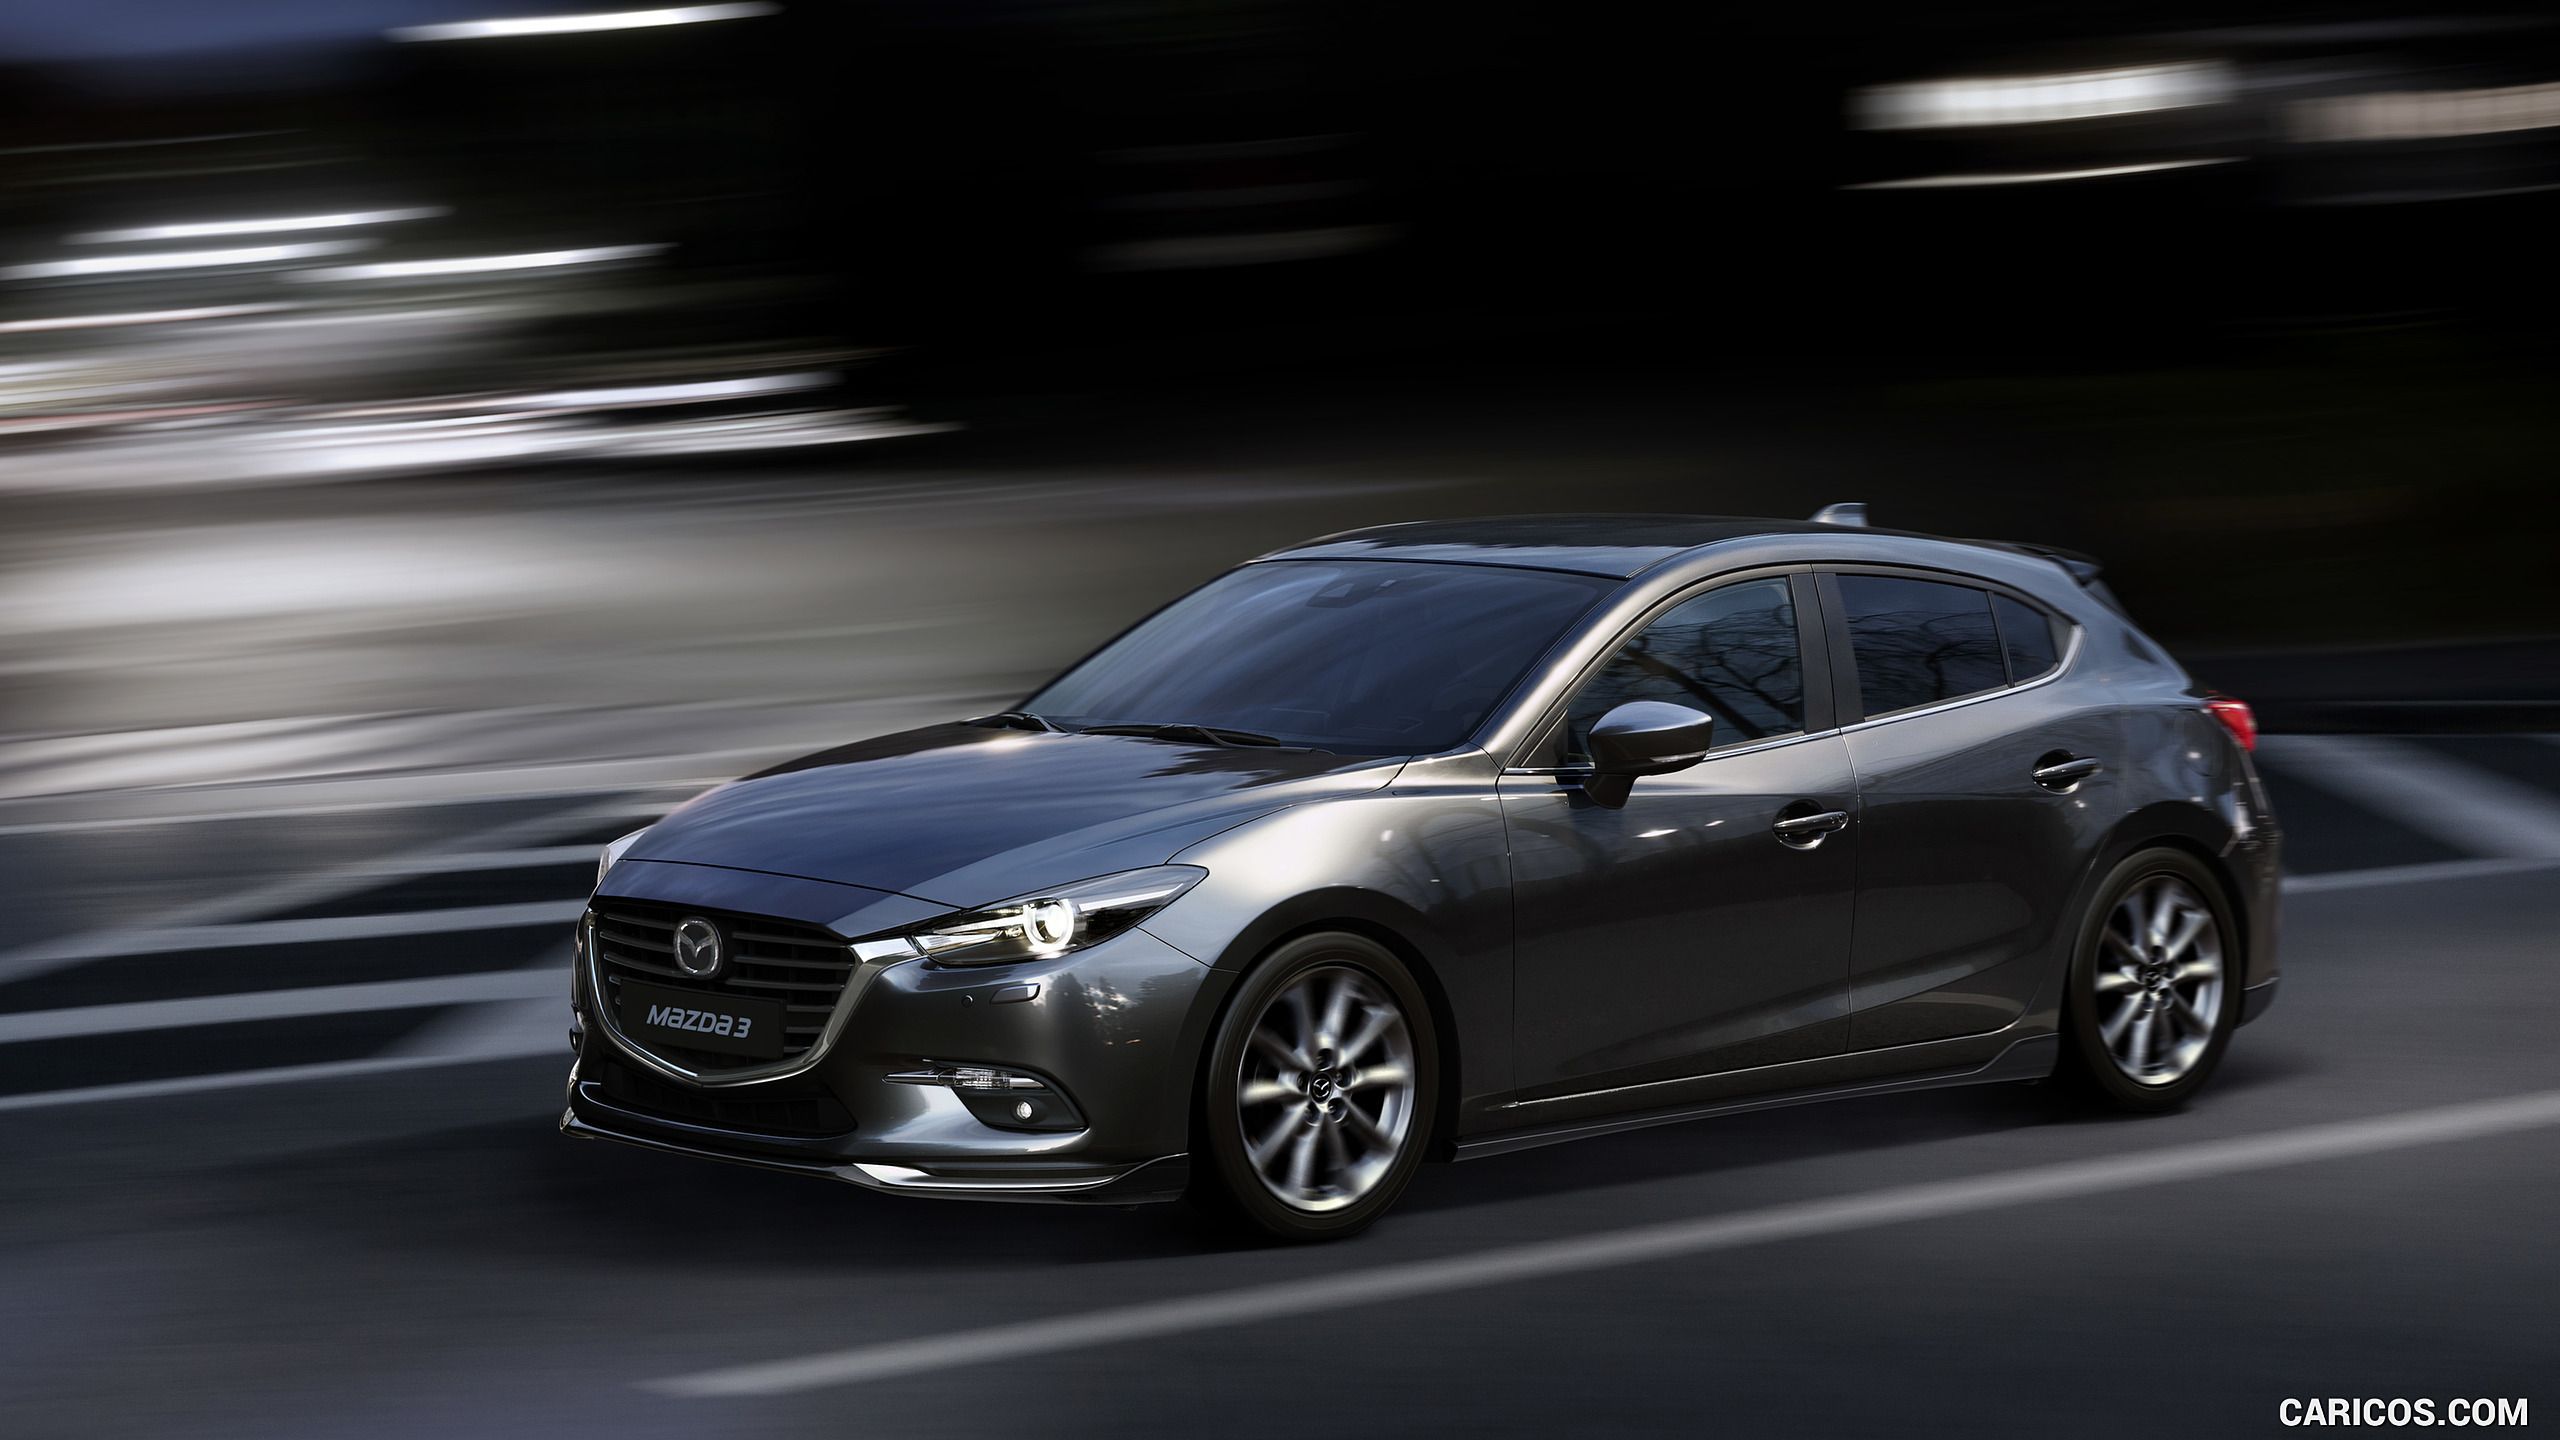 Top mazda 3 2017 wallpaper Download Book Source for free download HD, 4K & high quality wallpaper